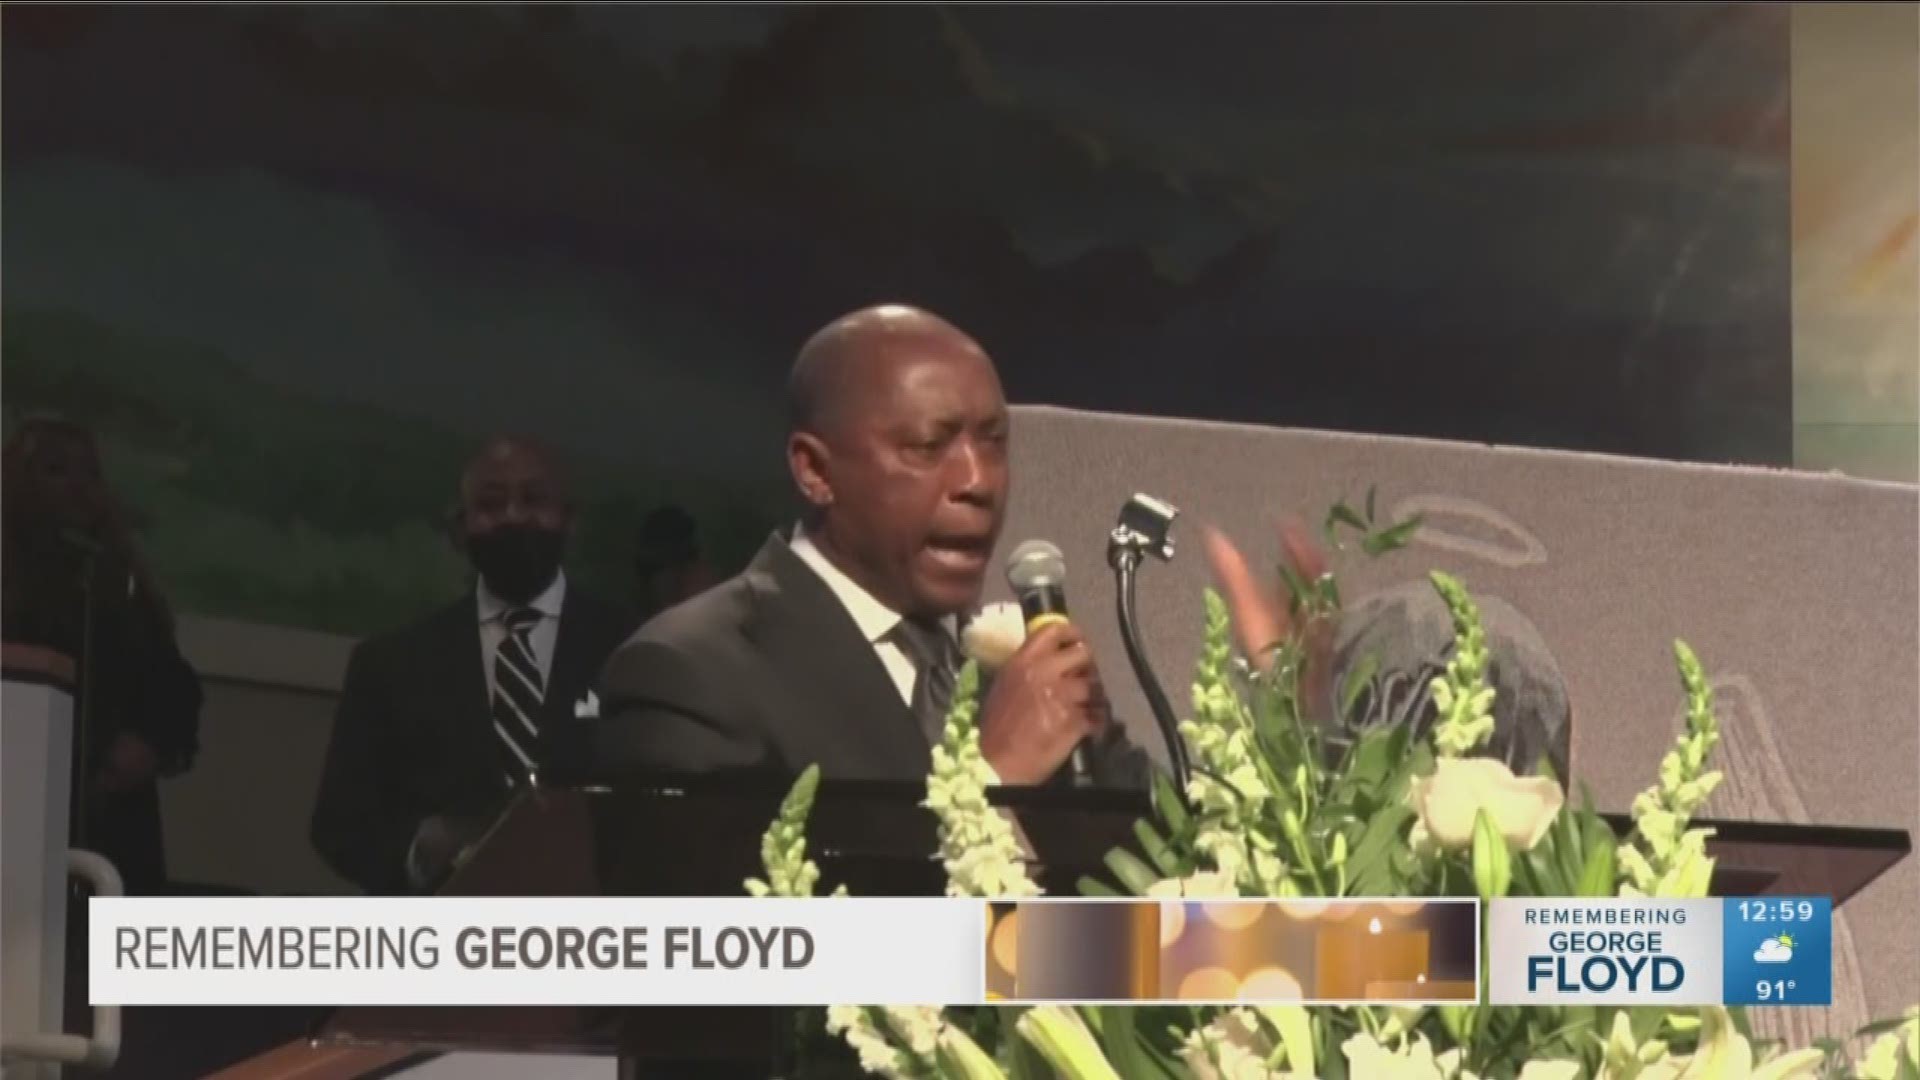 During Tuesday's George Floyd funeral, Mayor Turner says he's going to sign an executive order banning choke holds.